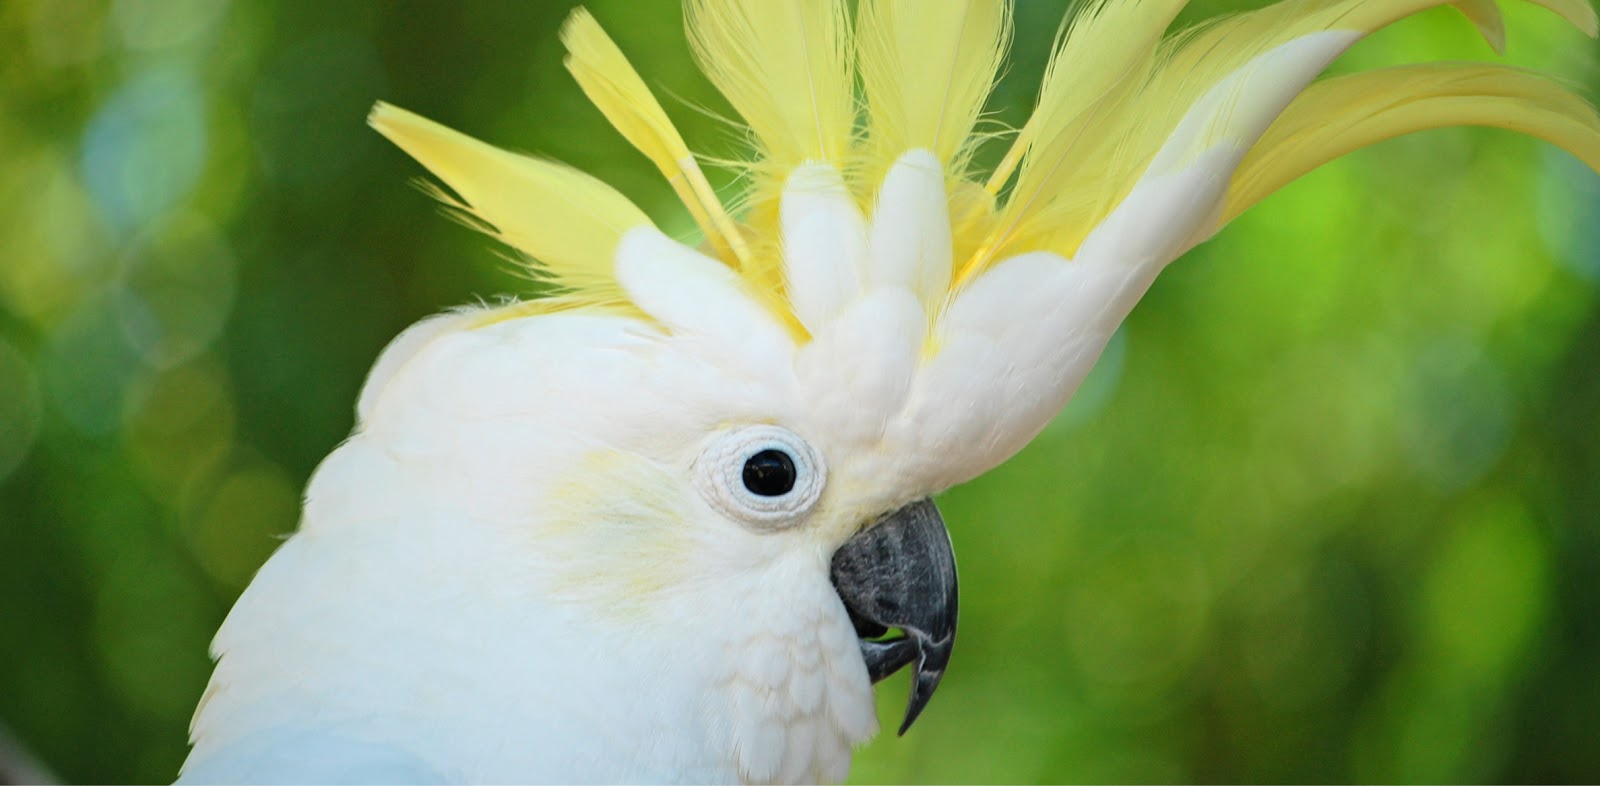 Parrot. White Parrot with yellow feathers on a head , #Ad, #White